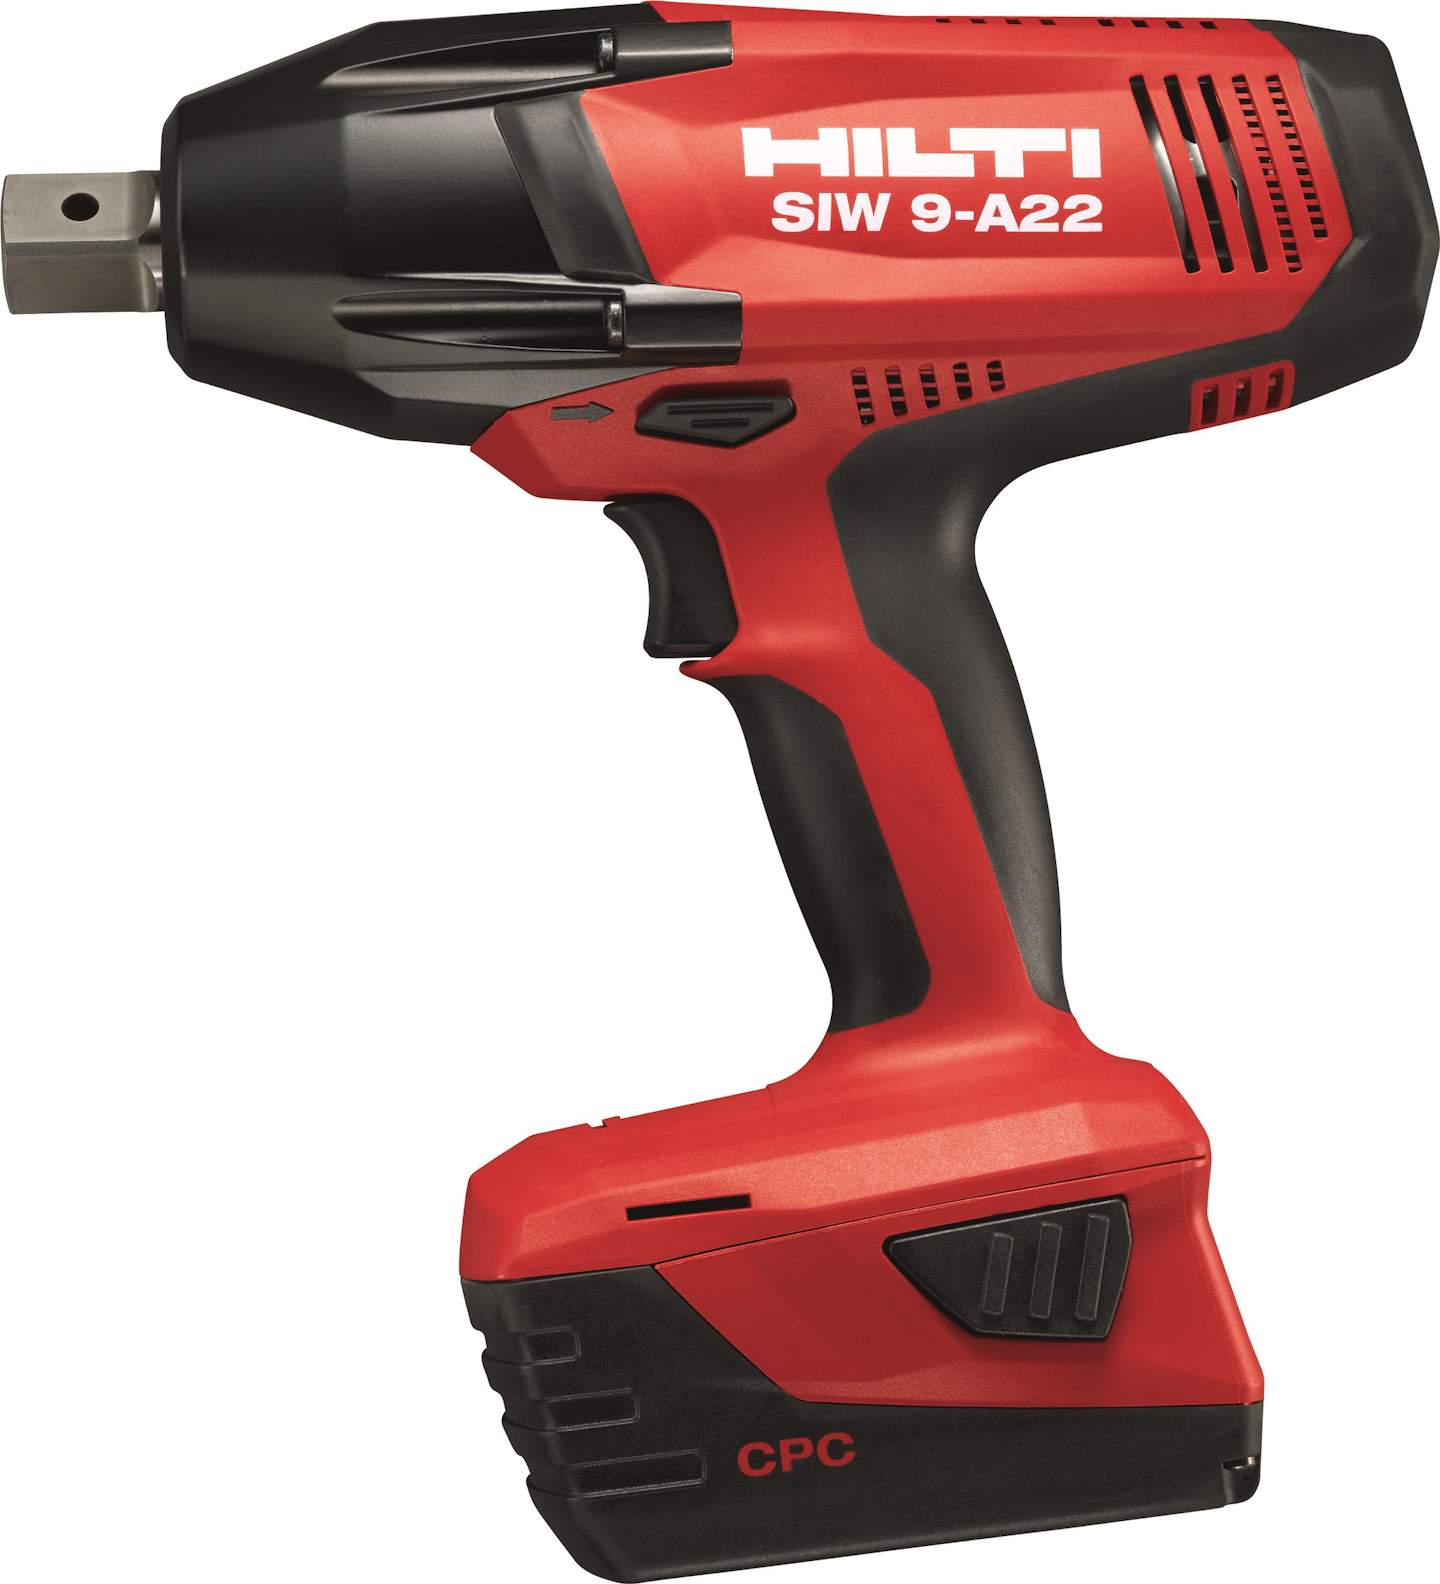 New Hilti 3/4 impact wrench offers more power and torque Equipment World